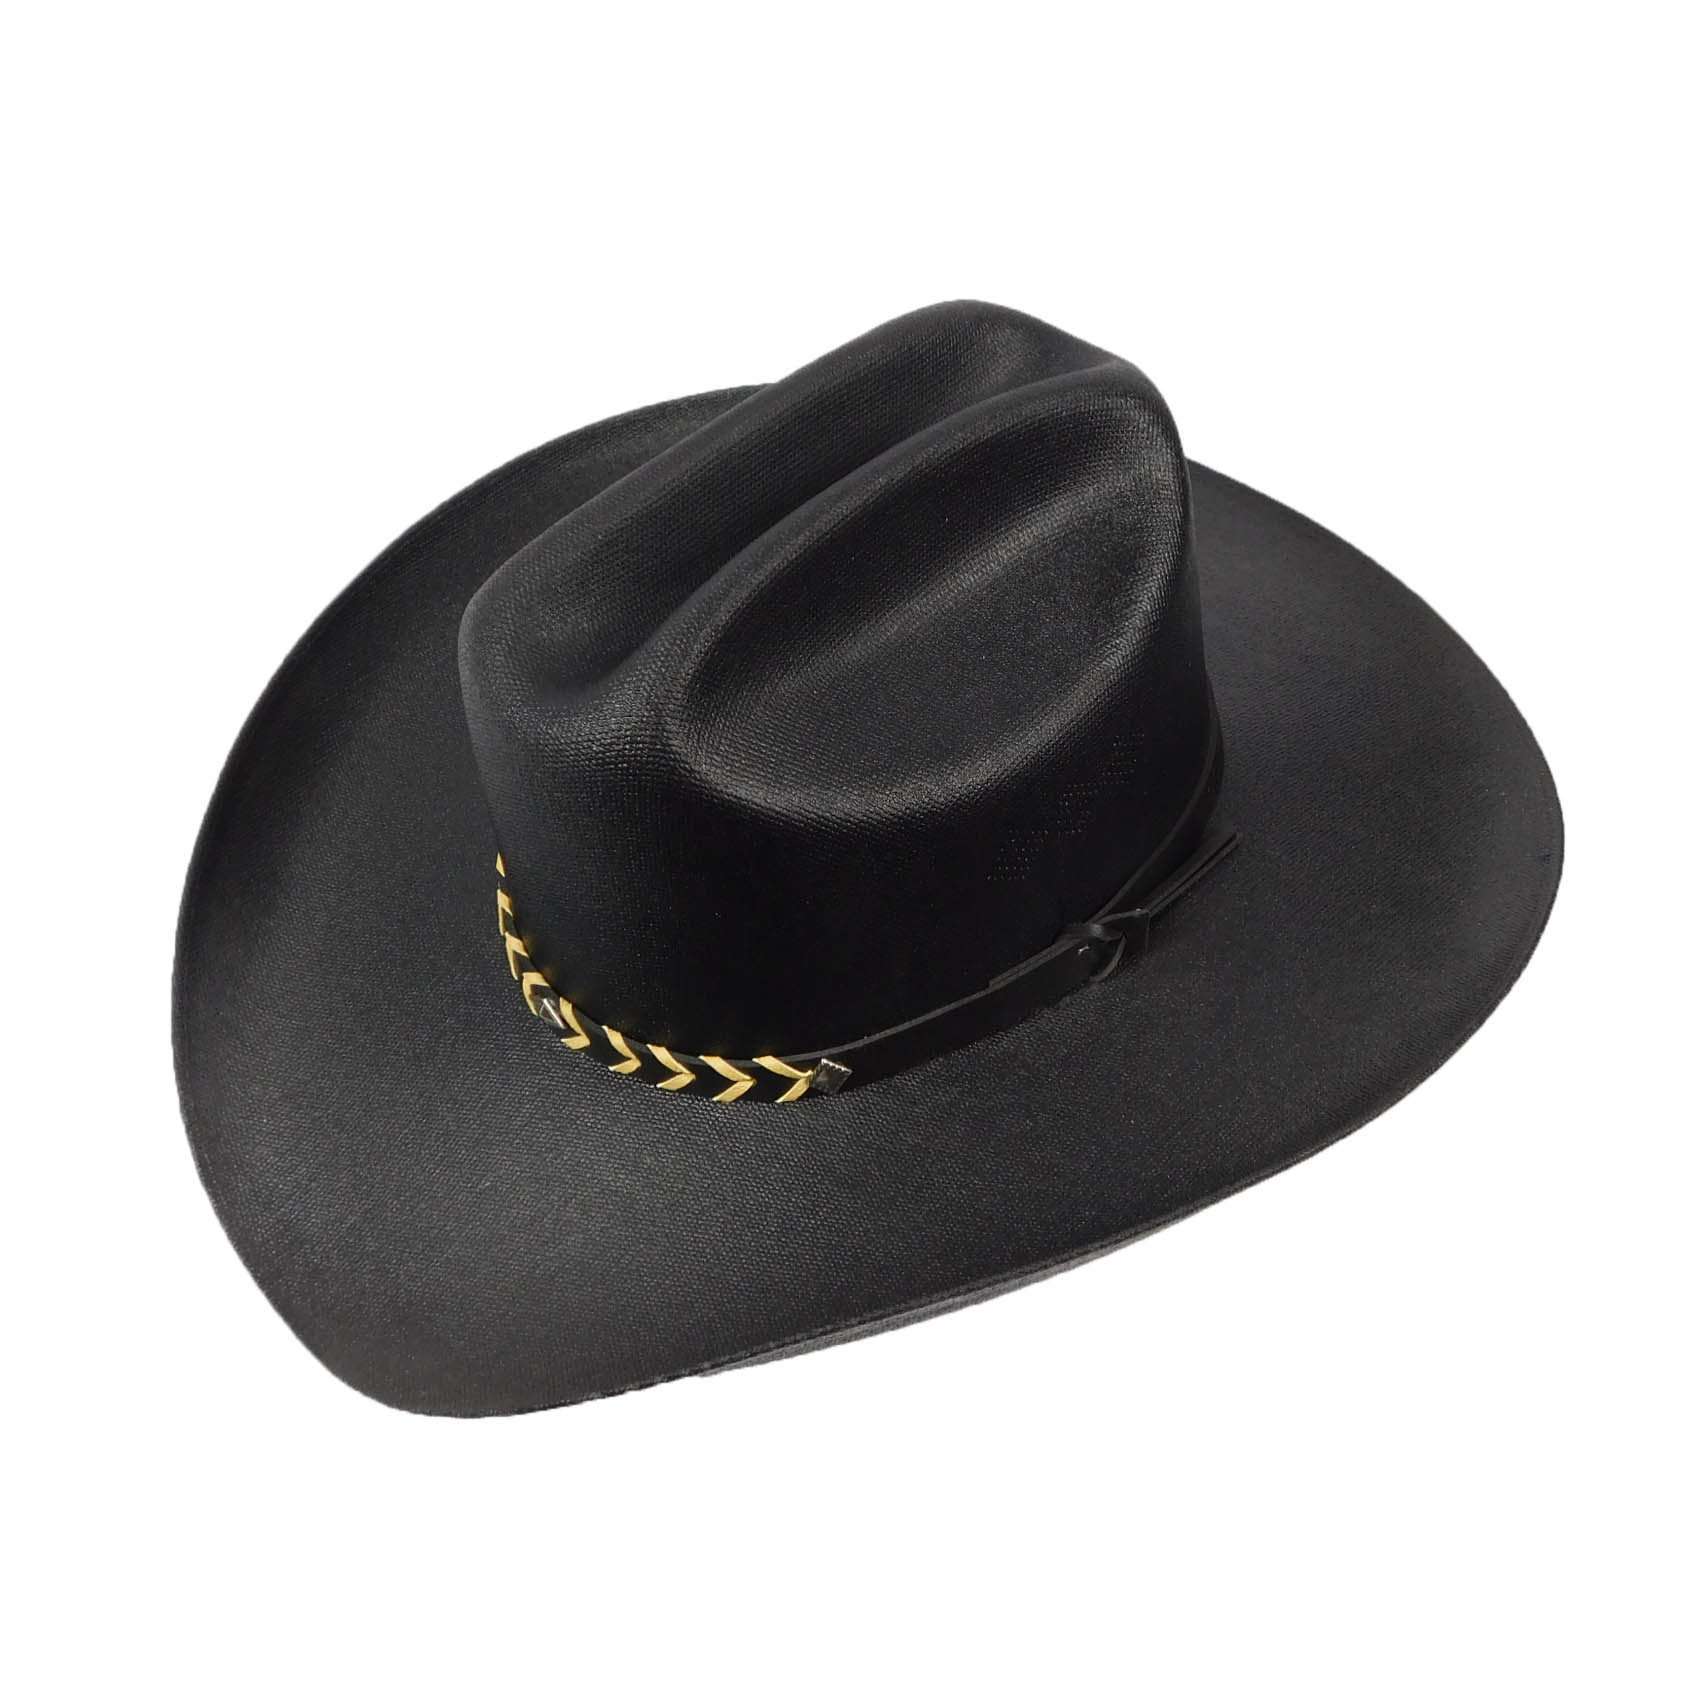 Cattleman Cowboy Hat by Goldcoast